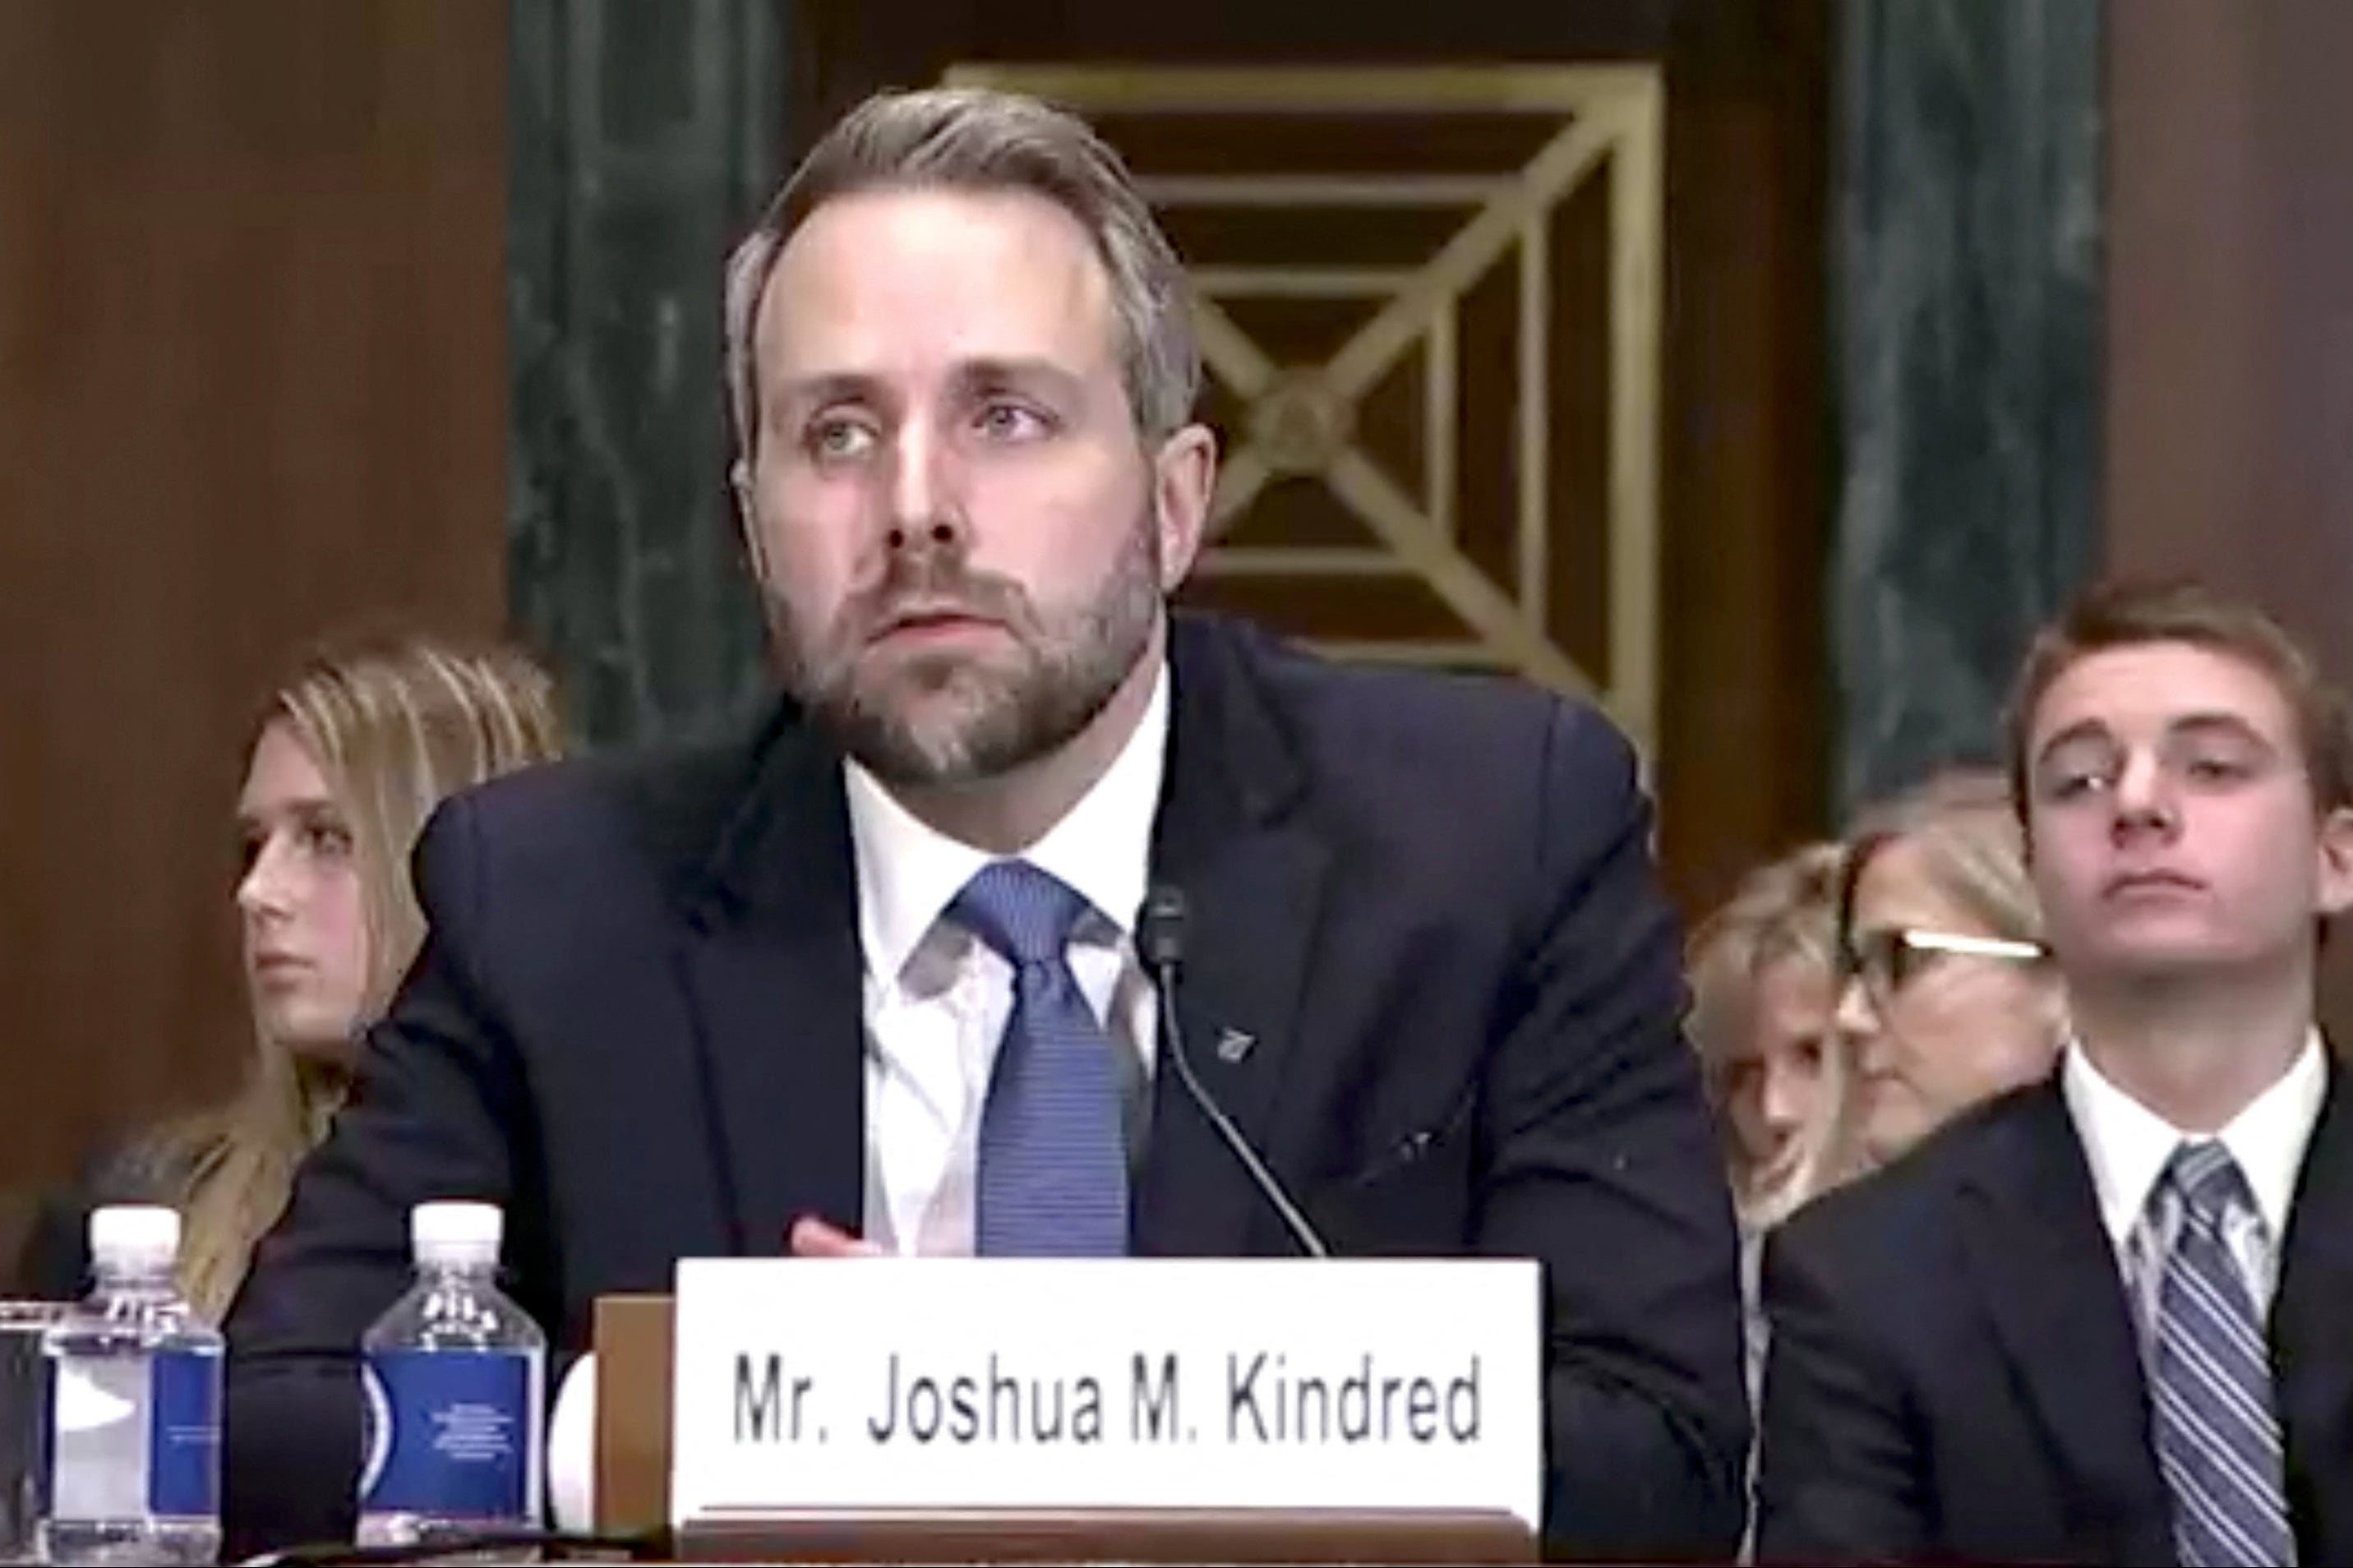 Joshua Kindred speaks during a judicial nomination hearing at the US Senate Committee on the Judiciary in Washington, DC on December 4, 2019.